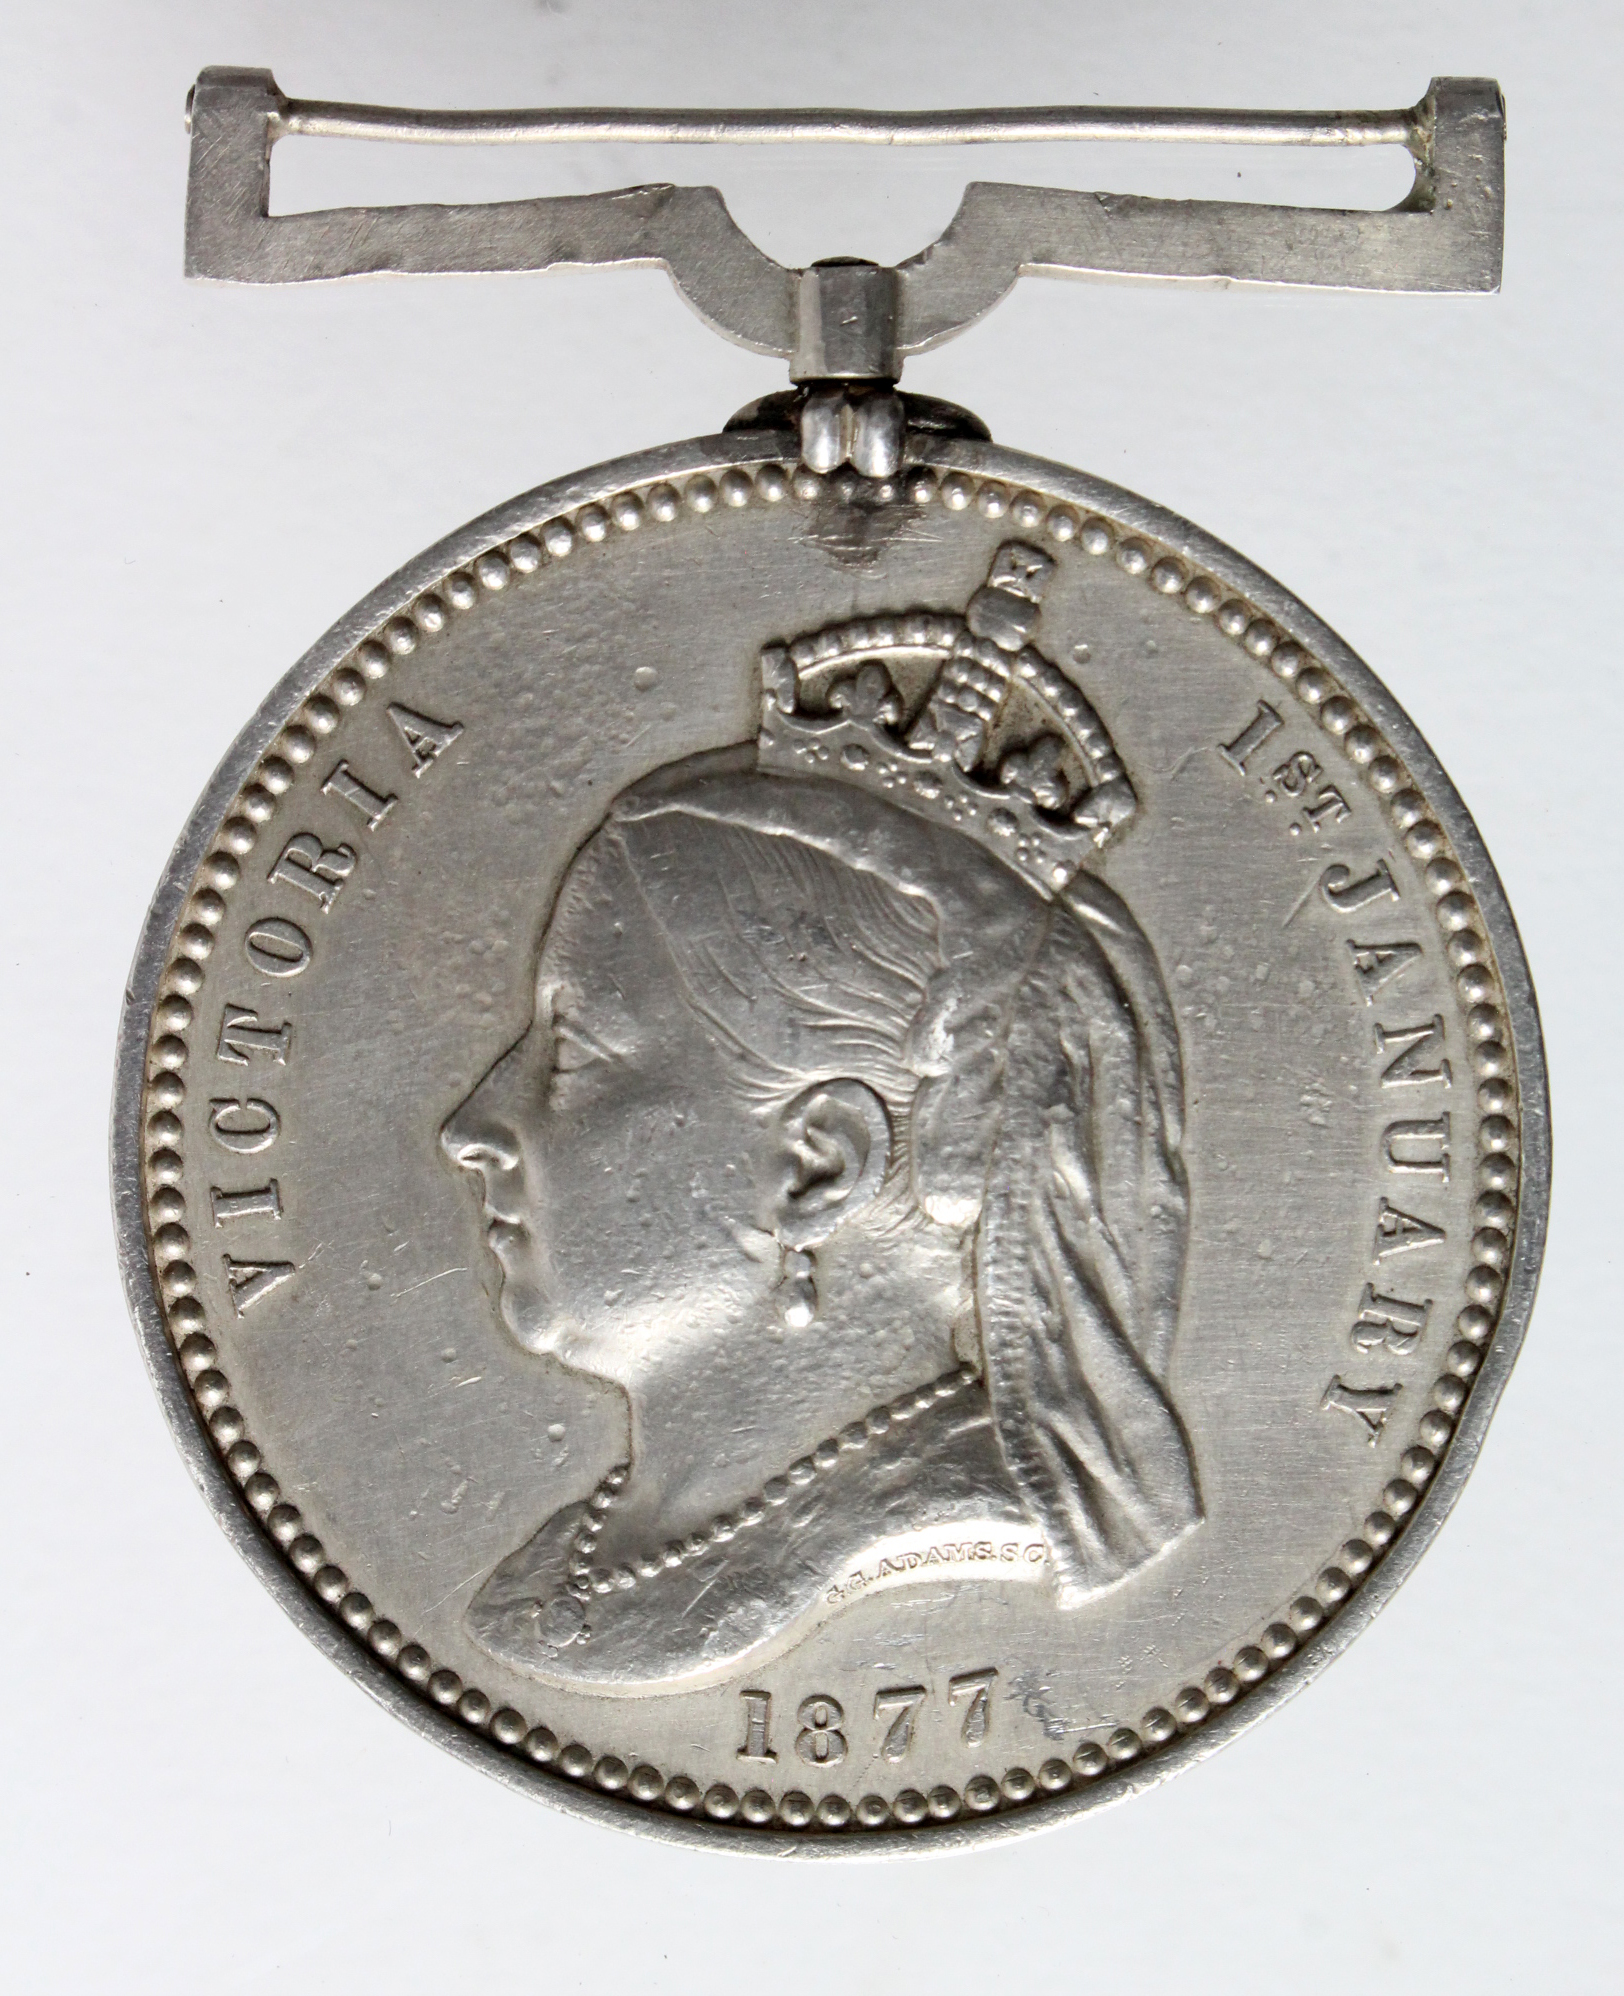 Empress of India Medal 1877 in silver. Edge bump and contact marks. GF